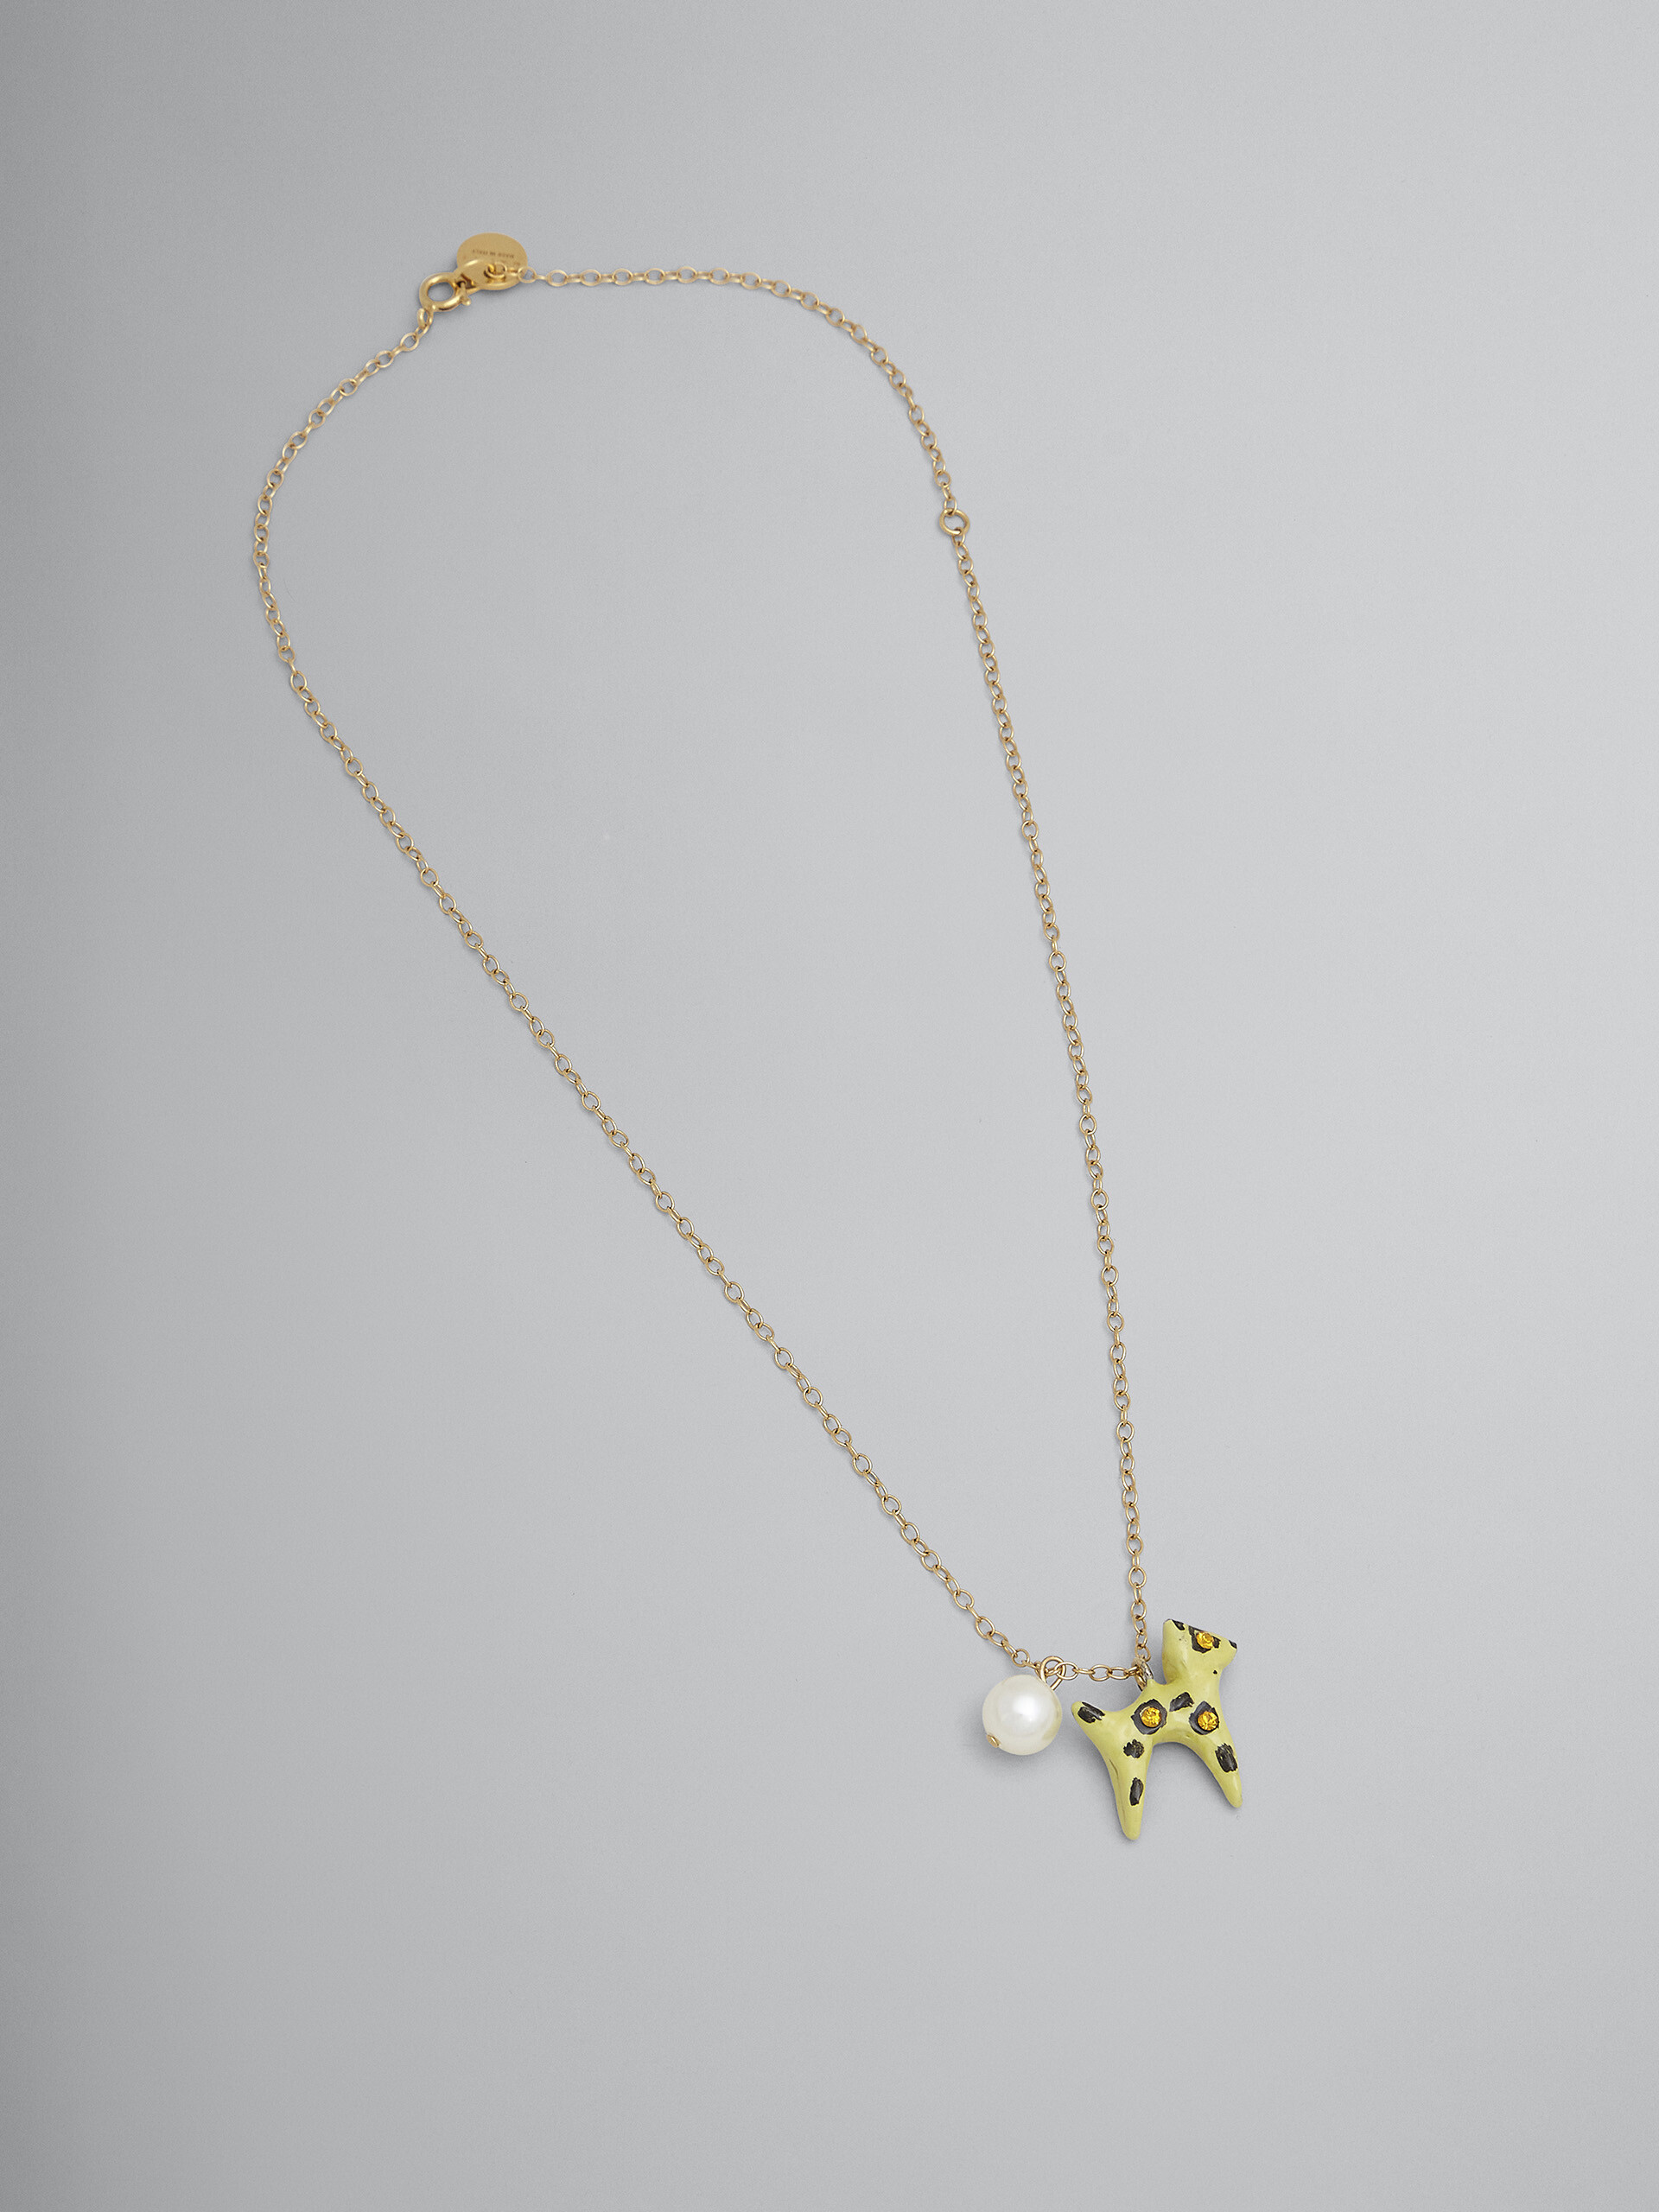 PLAYFUL yellow necklace - Necklaces - Image 1